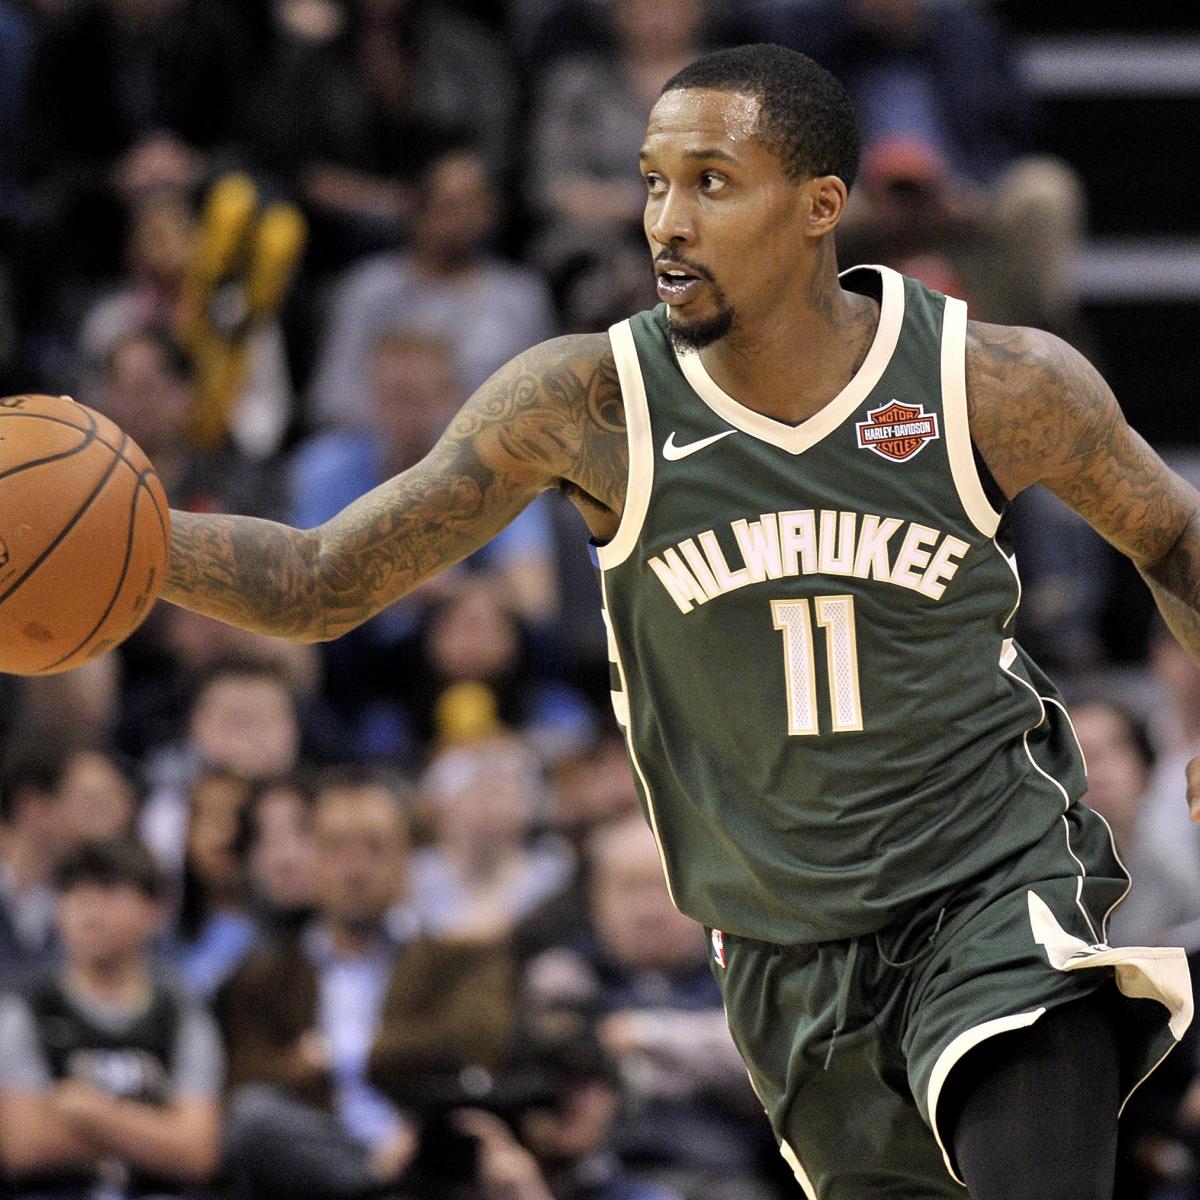 Bucks Sign Brandon Jennings To A 10-Day Contract